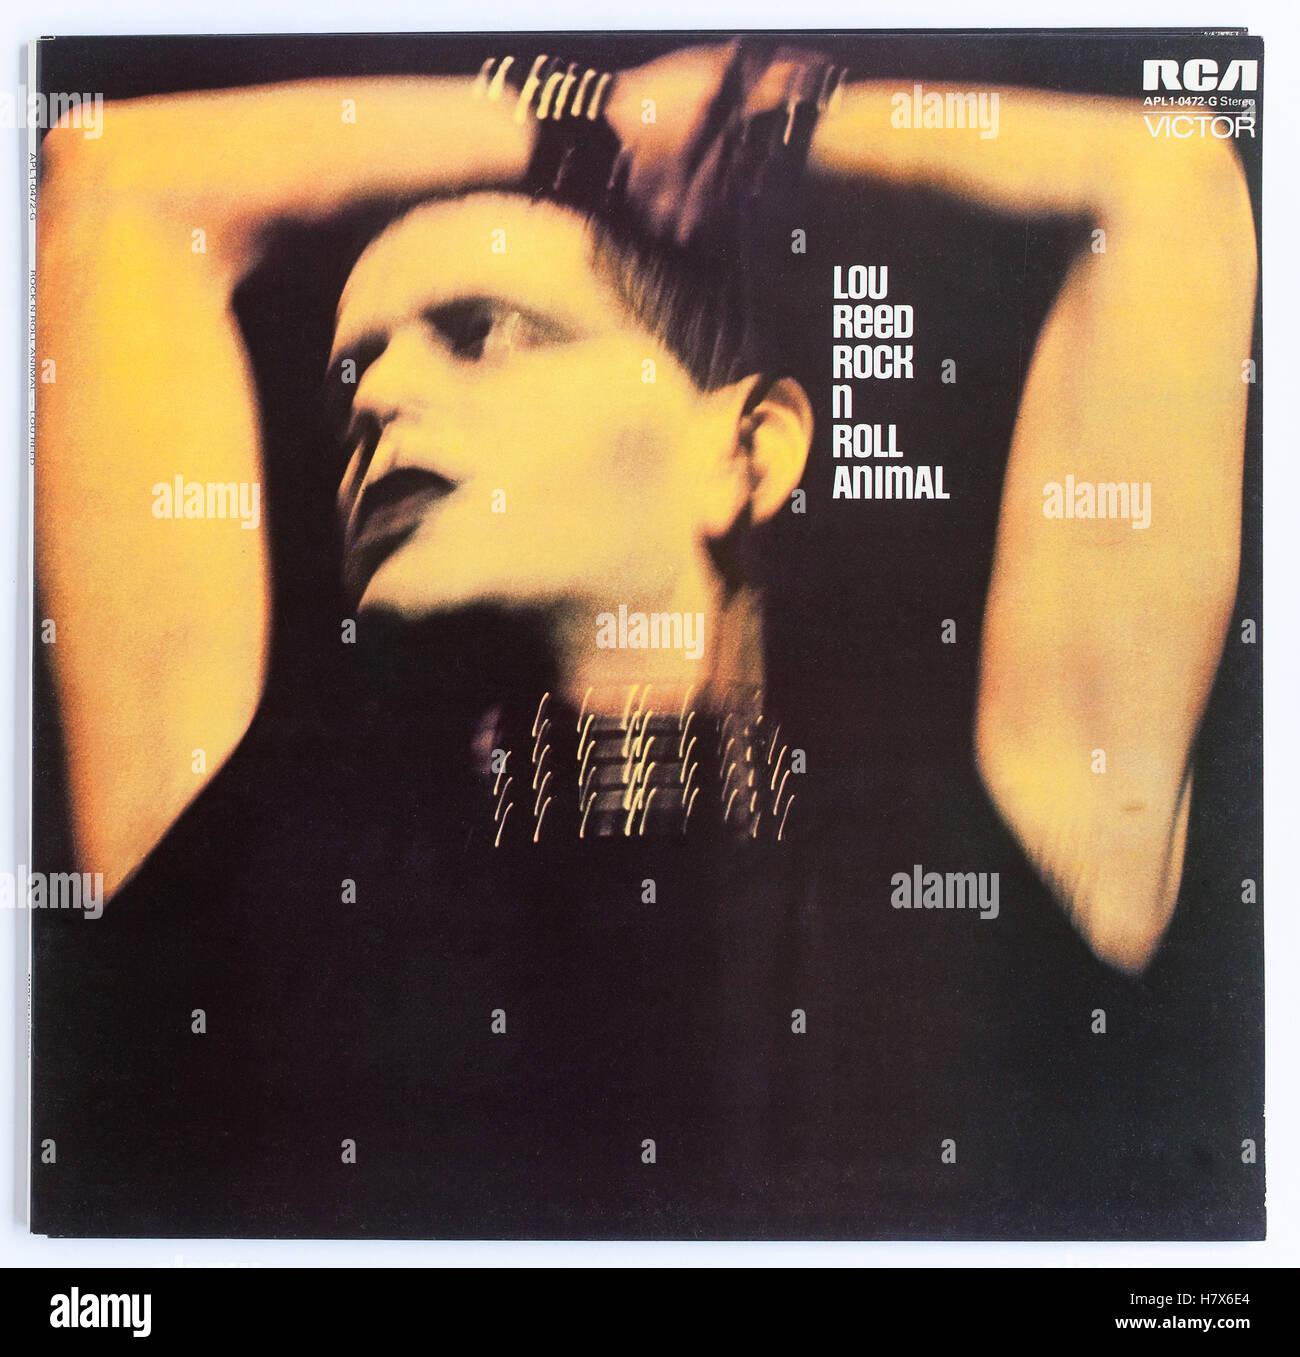 Cover art for Rock n Roll Animal, 1974 live album by Lou Reed on RCA  Records - Editorial use only Stock Photo - Alamy